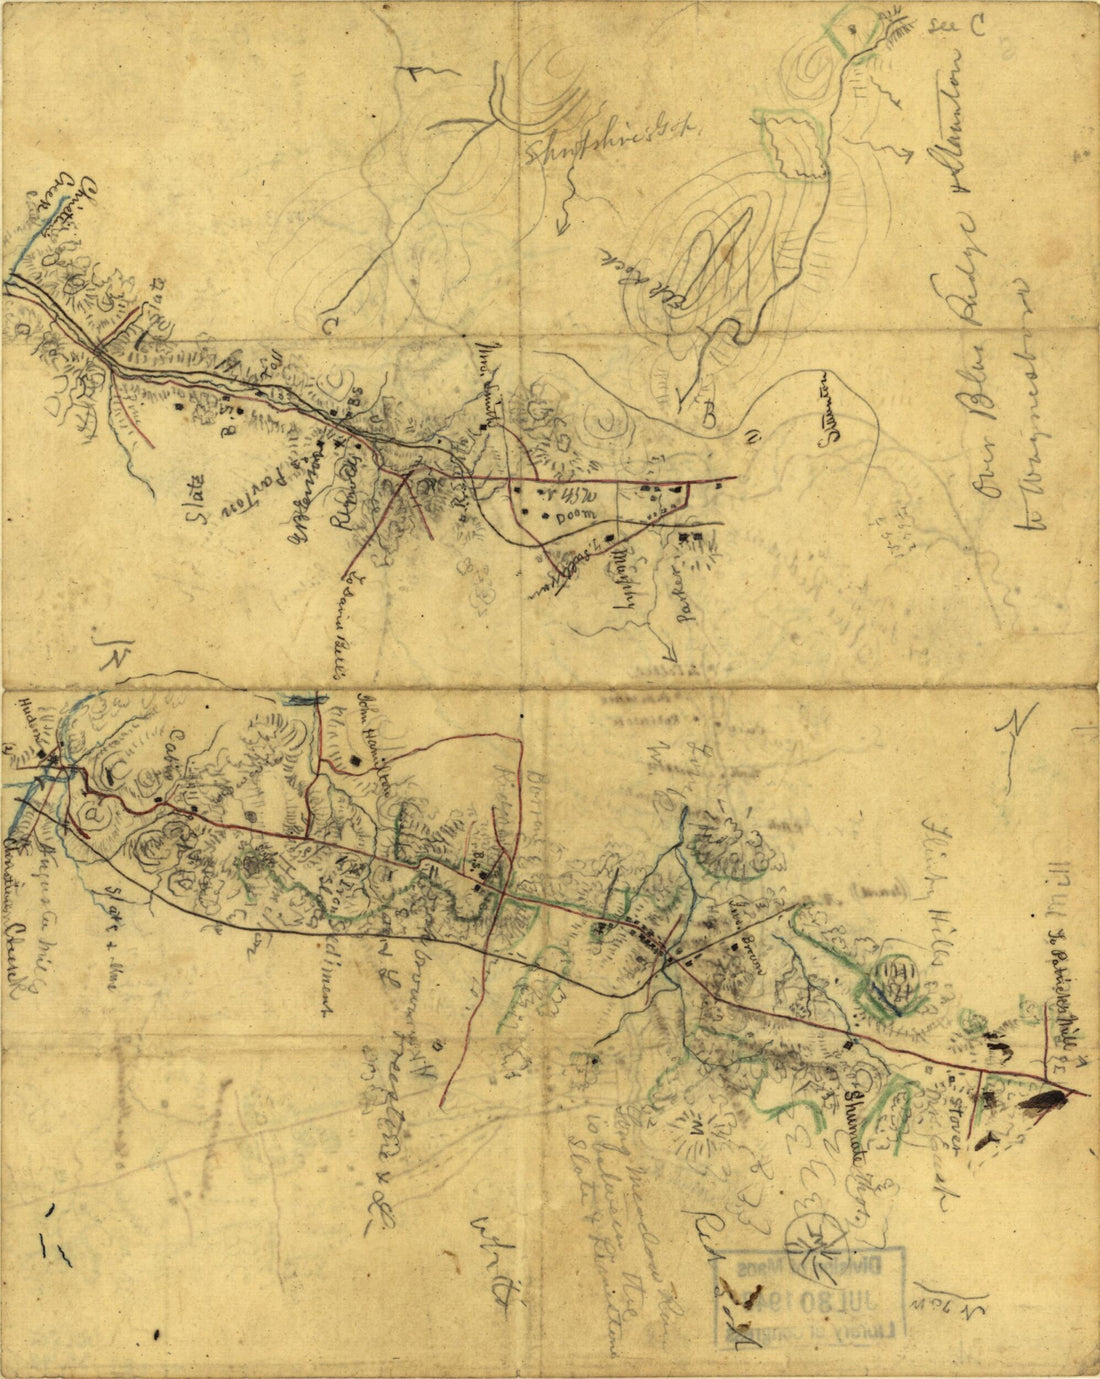 This old map of Sketch of the Road from Waynesboro Toward Staunton, In Augusta County, Virginia. from 1860 was created by Jedediah Hotchkiss in 1860